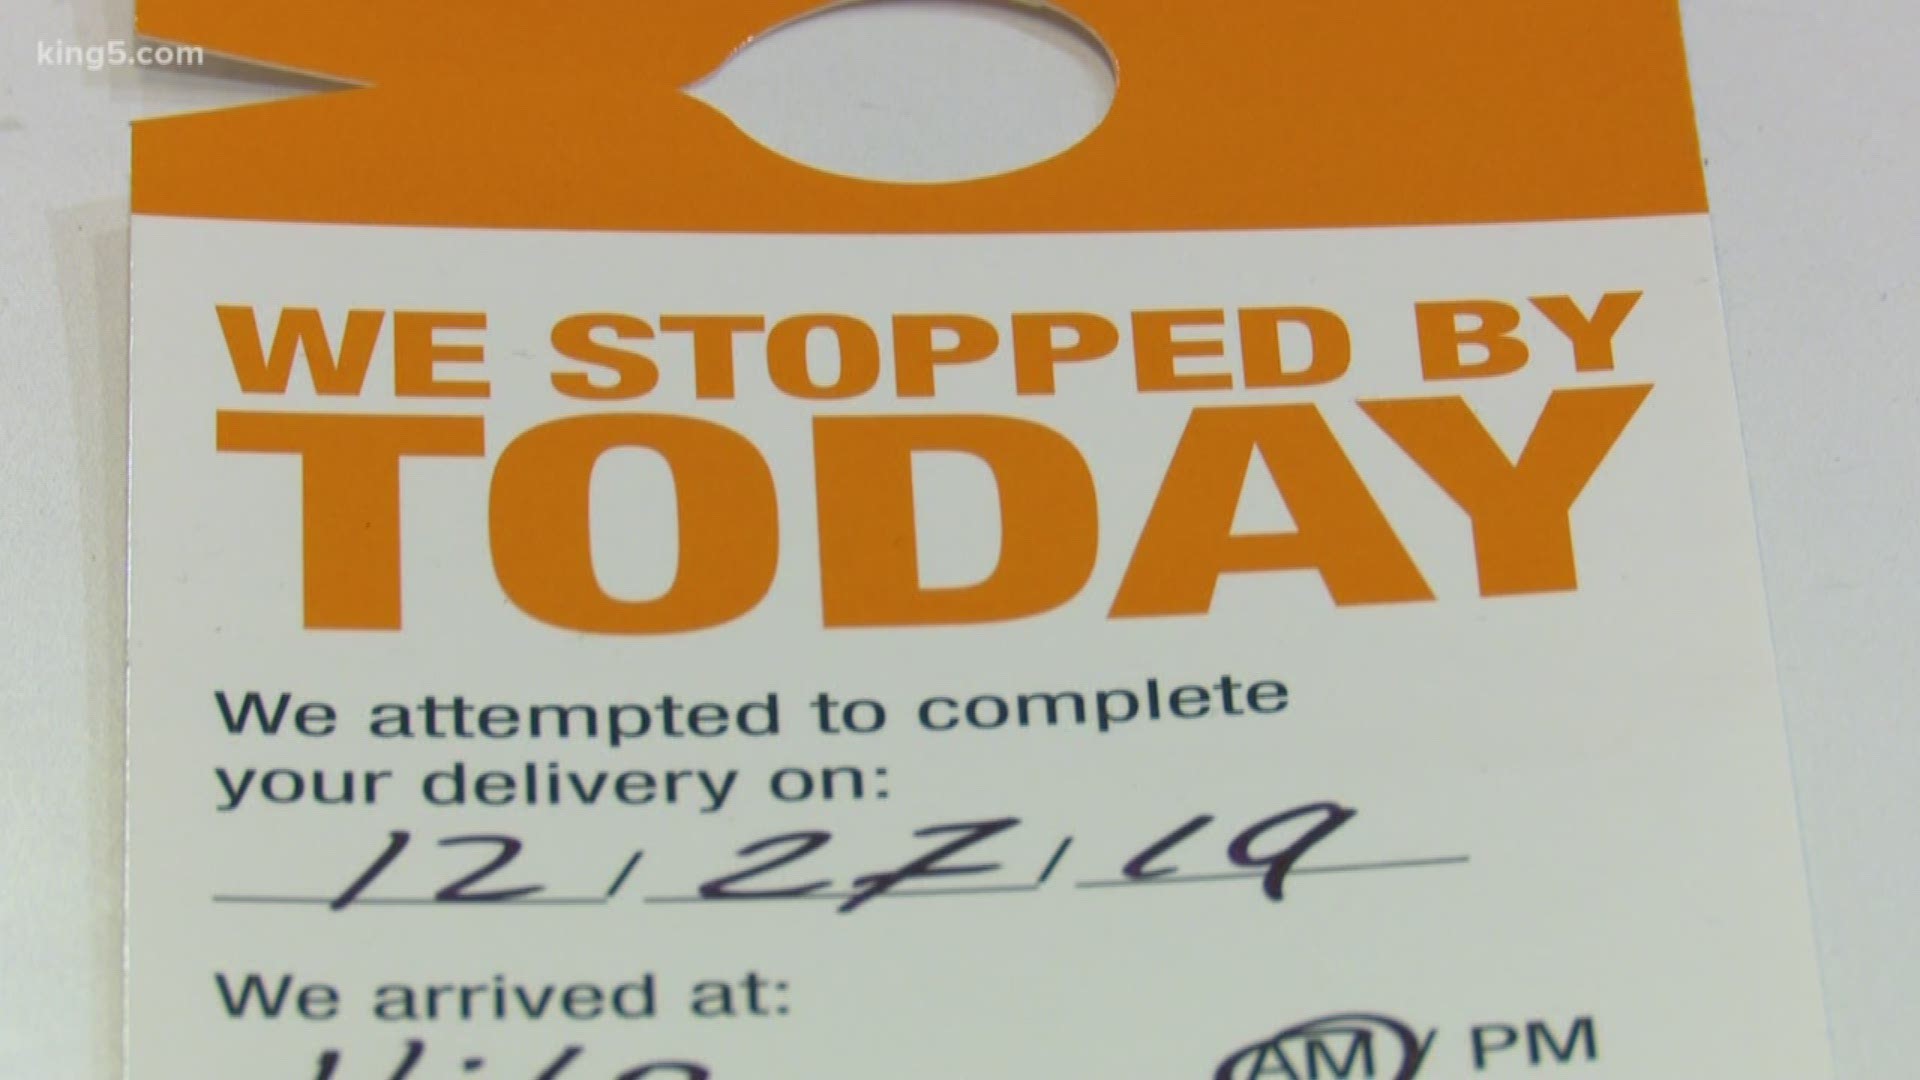 Lara Zarowsky of Seattle says she was fearful after an offensive word was left on a missed delivery slip from Home Depot last week.